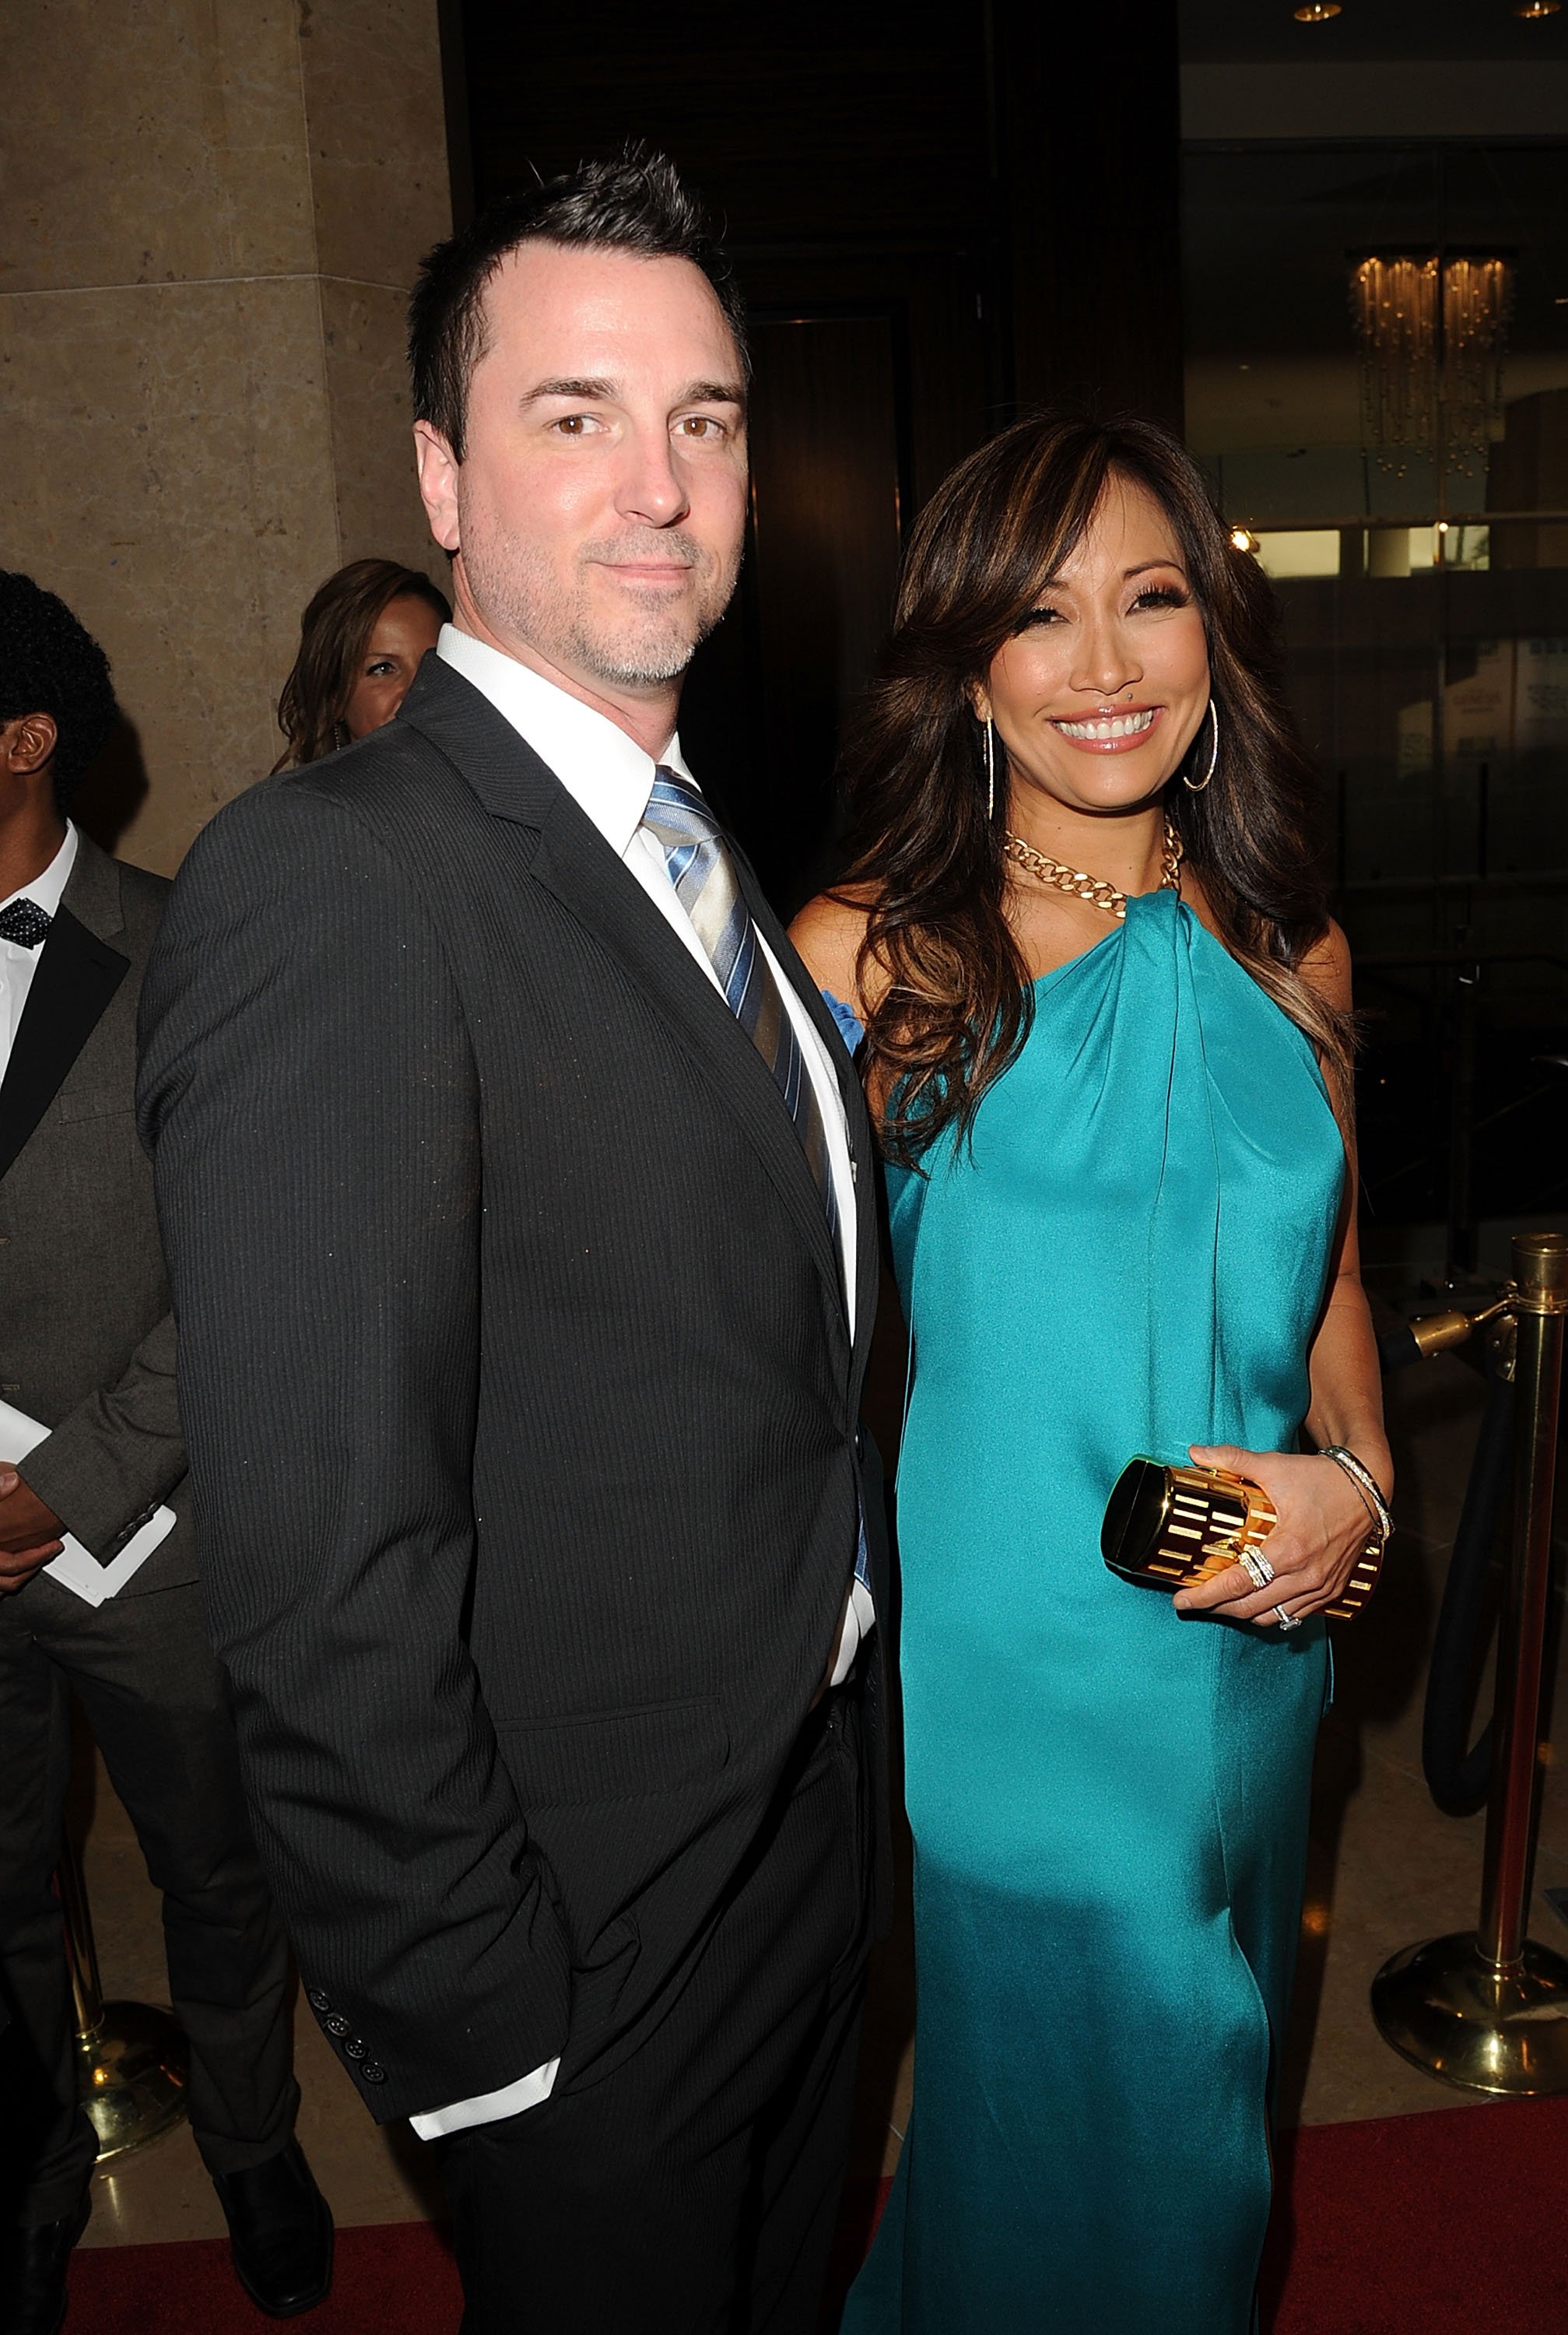 Carrie Ann Inaba From Dancing With The Stars Has Been Engaged Twice But Never Married 